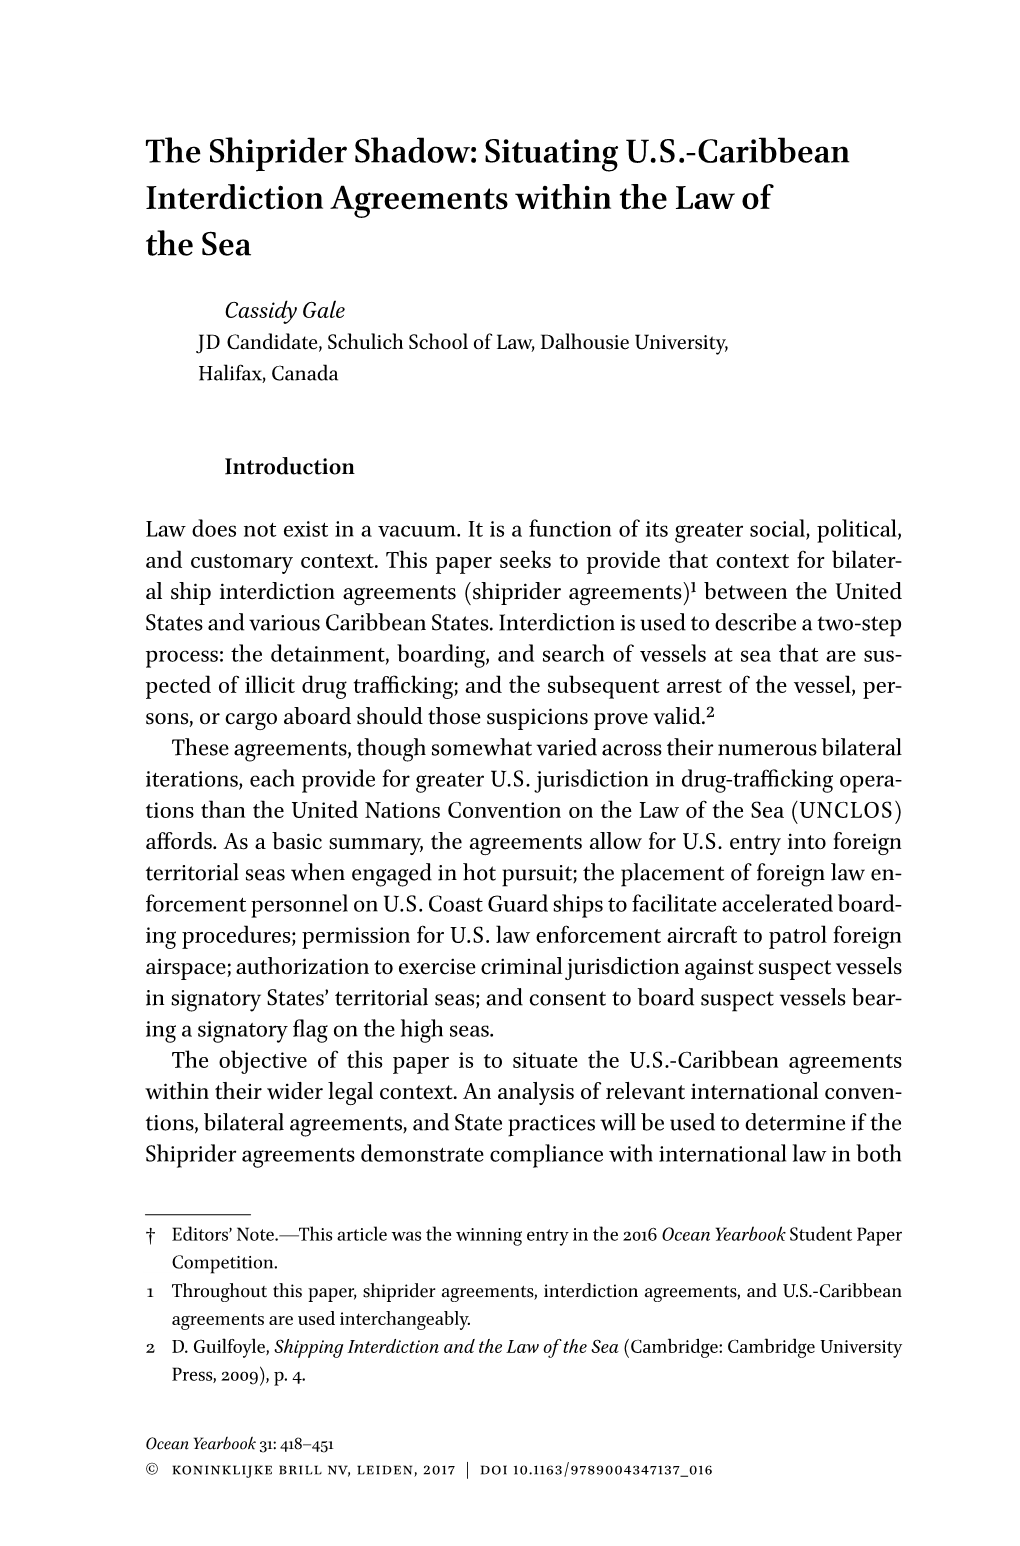 The Shiprider Shadow: Situating U.S.-Caribbean Interdiction Agreements Within the Law of the Sea